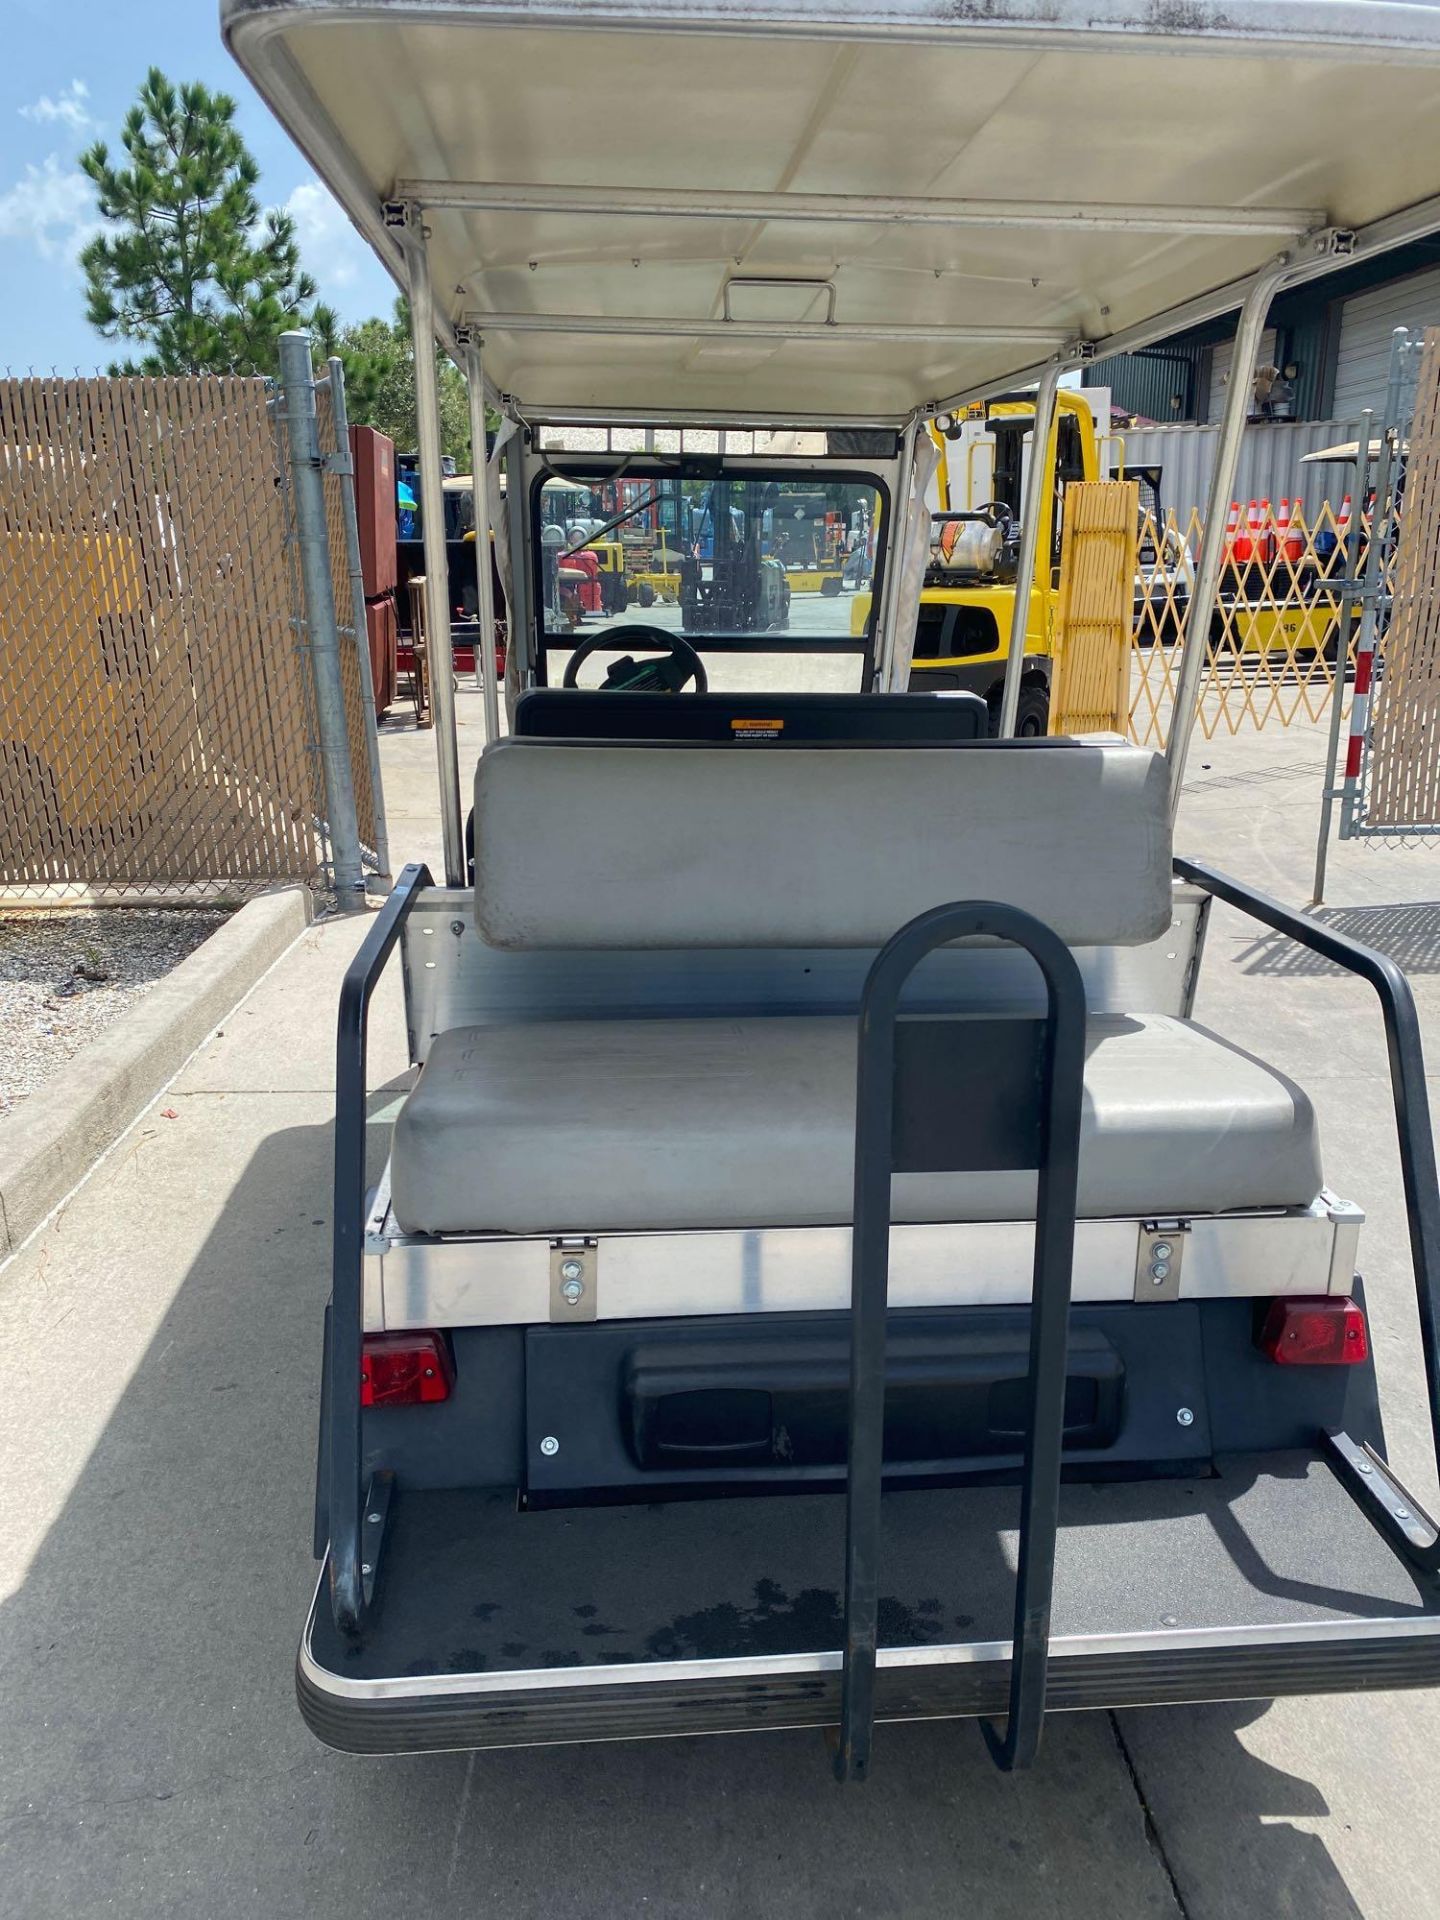 CLUB CAR TRANSPORTER 6 48V ELECTRIC GOLF CART, BUILT IN CHARGER, RUNS AND OPERATES - Image 9 of 9